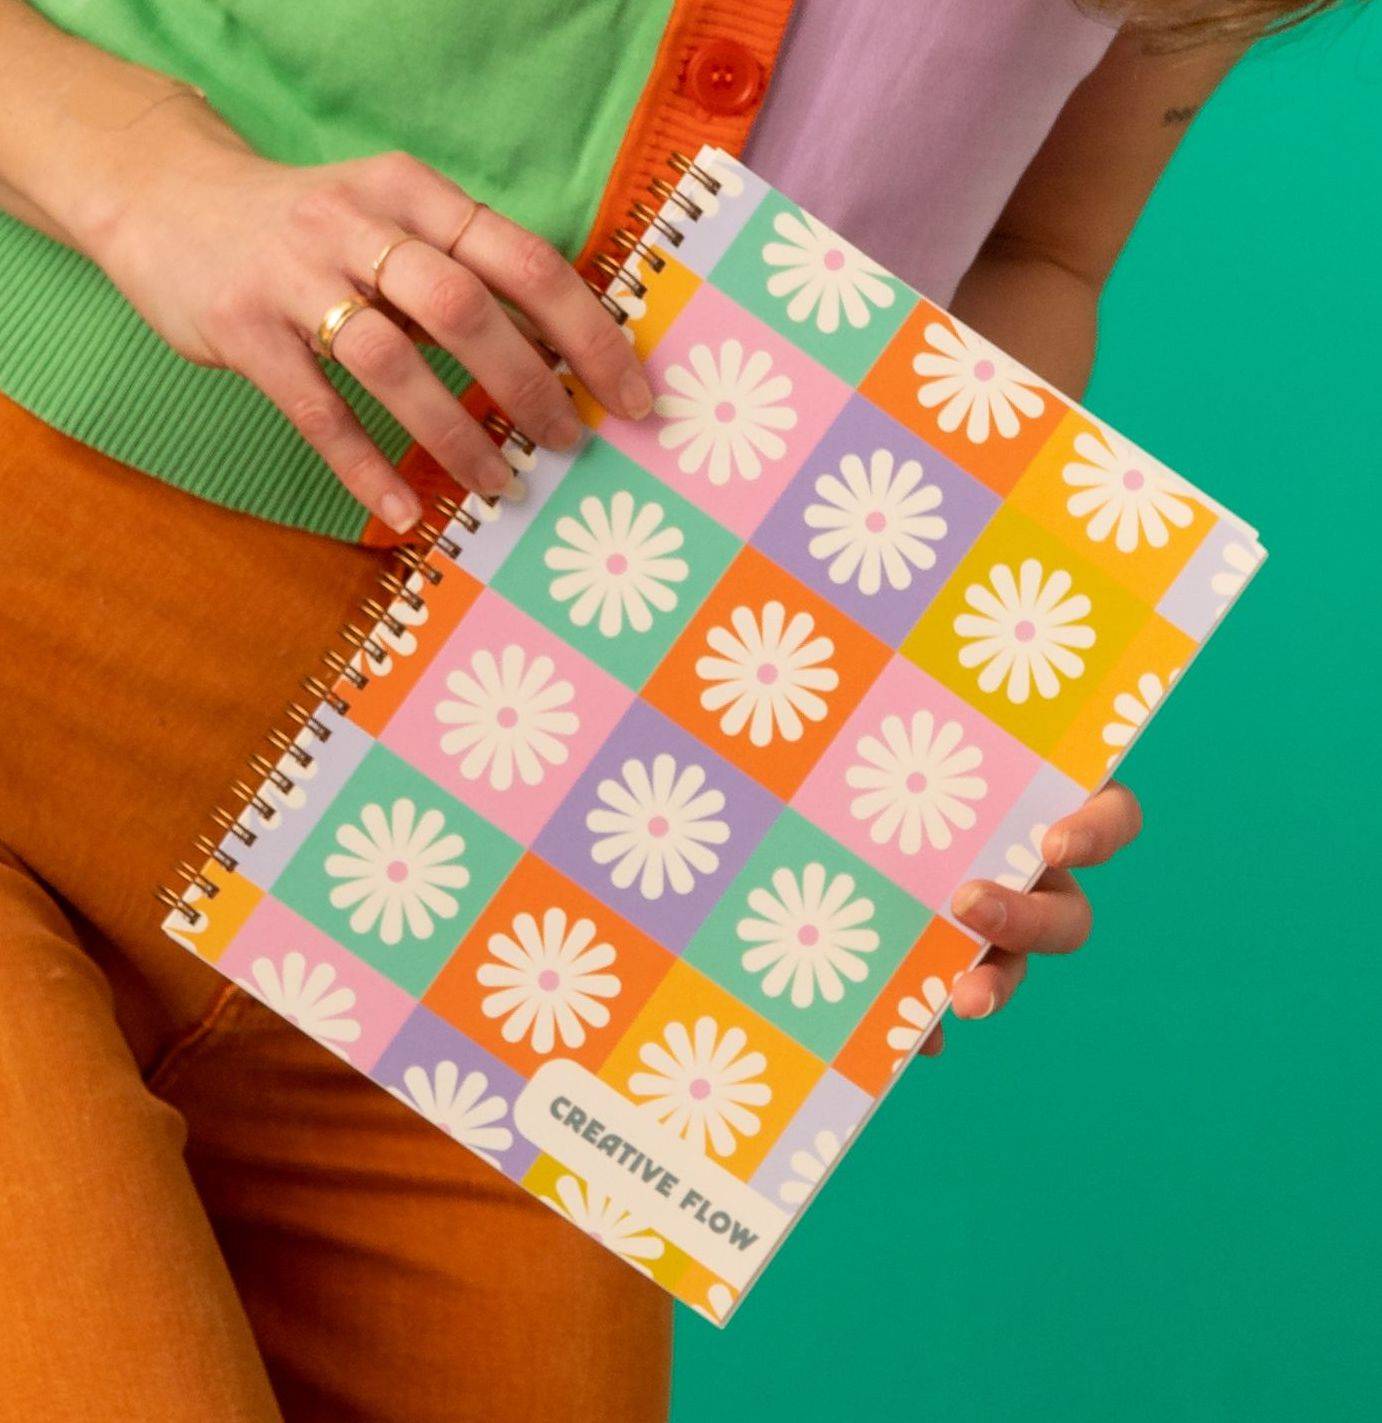 A close-up shot of a woman holding the Creative Flow Journal. It is a journal with space to doodle your day and express your creativity! The cover has a colorful grid pattern with white daisy's in each square. 